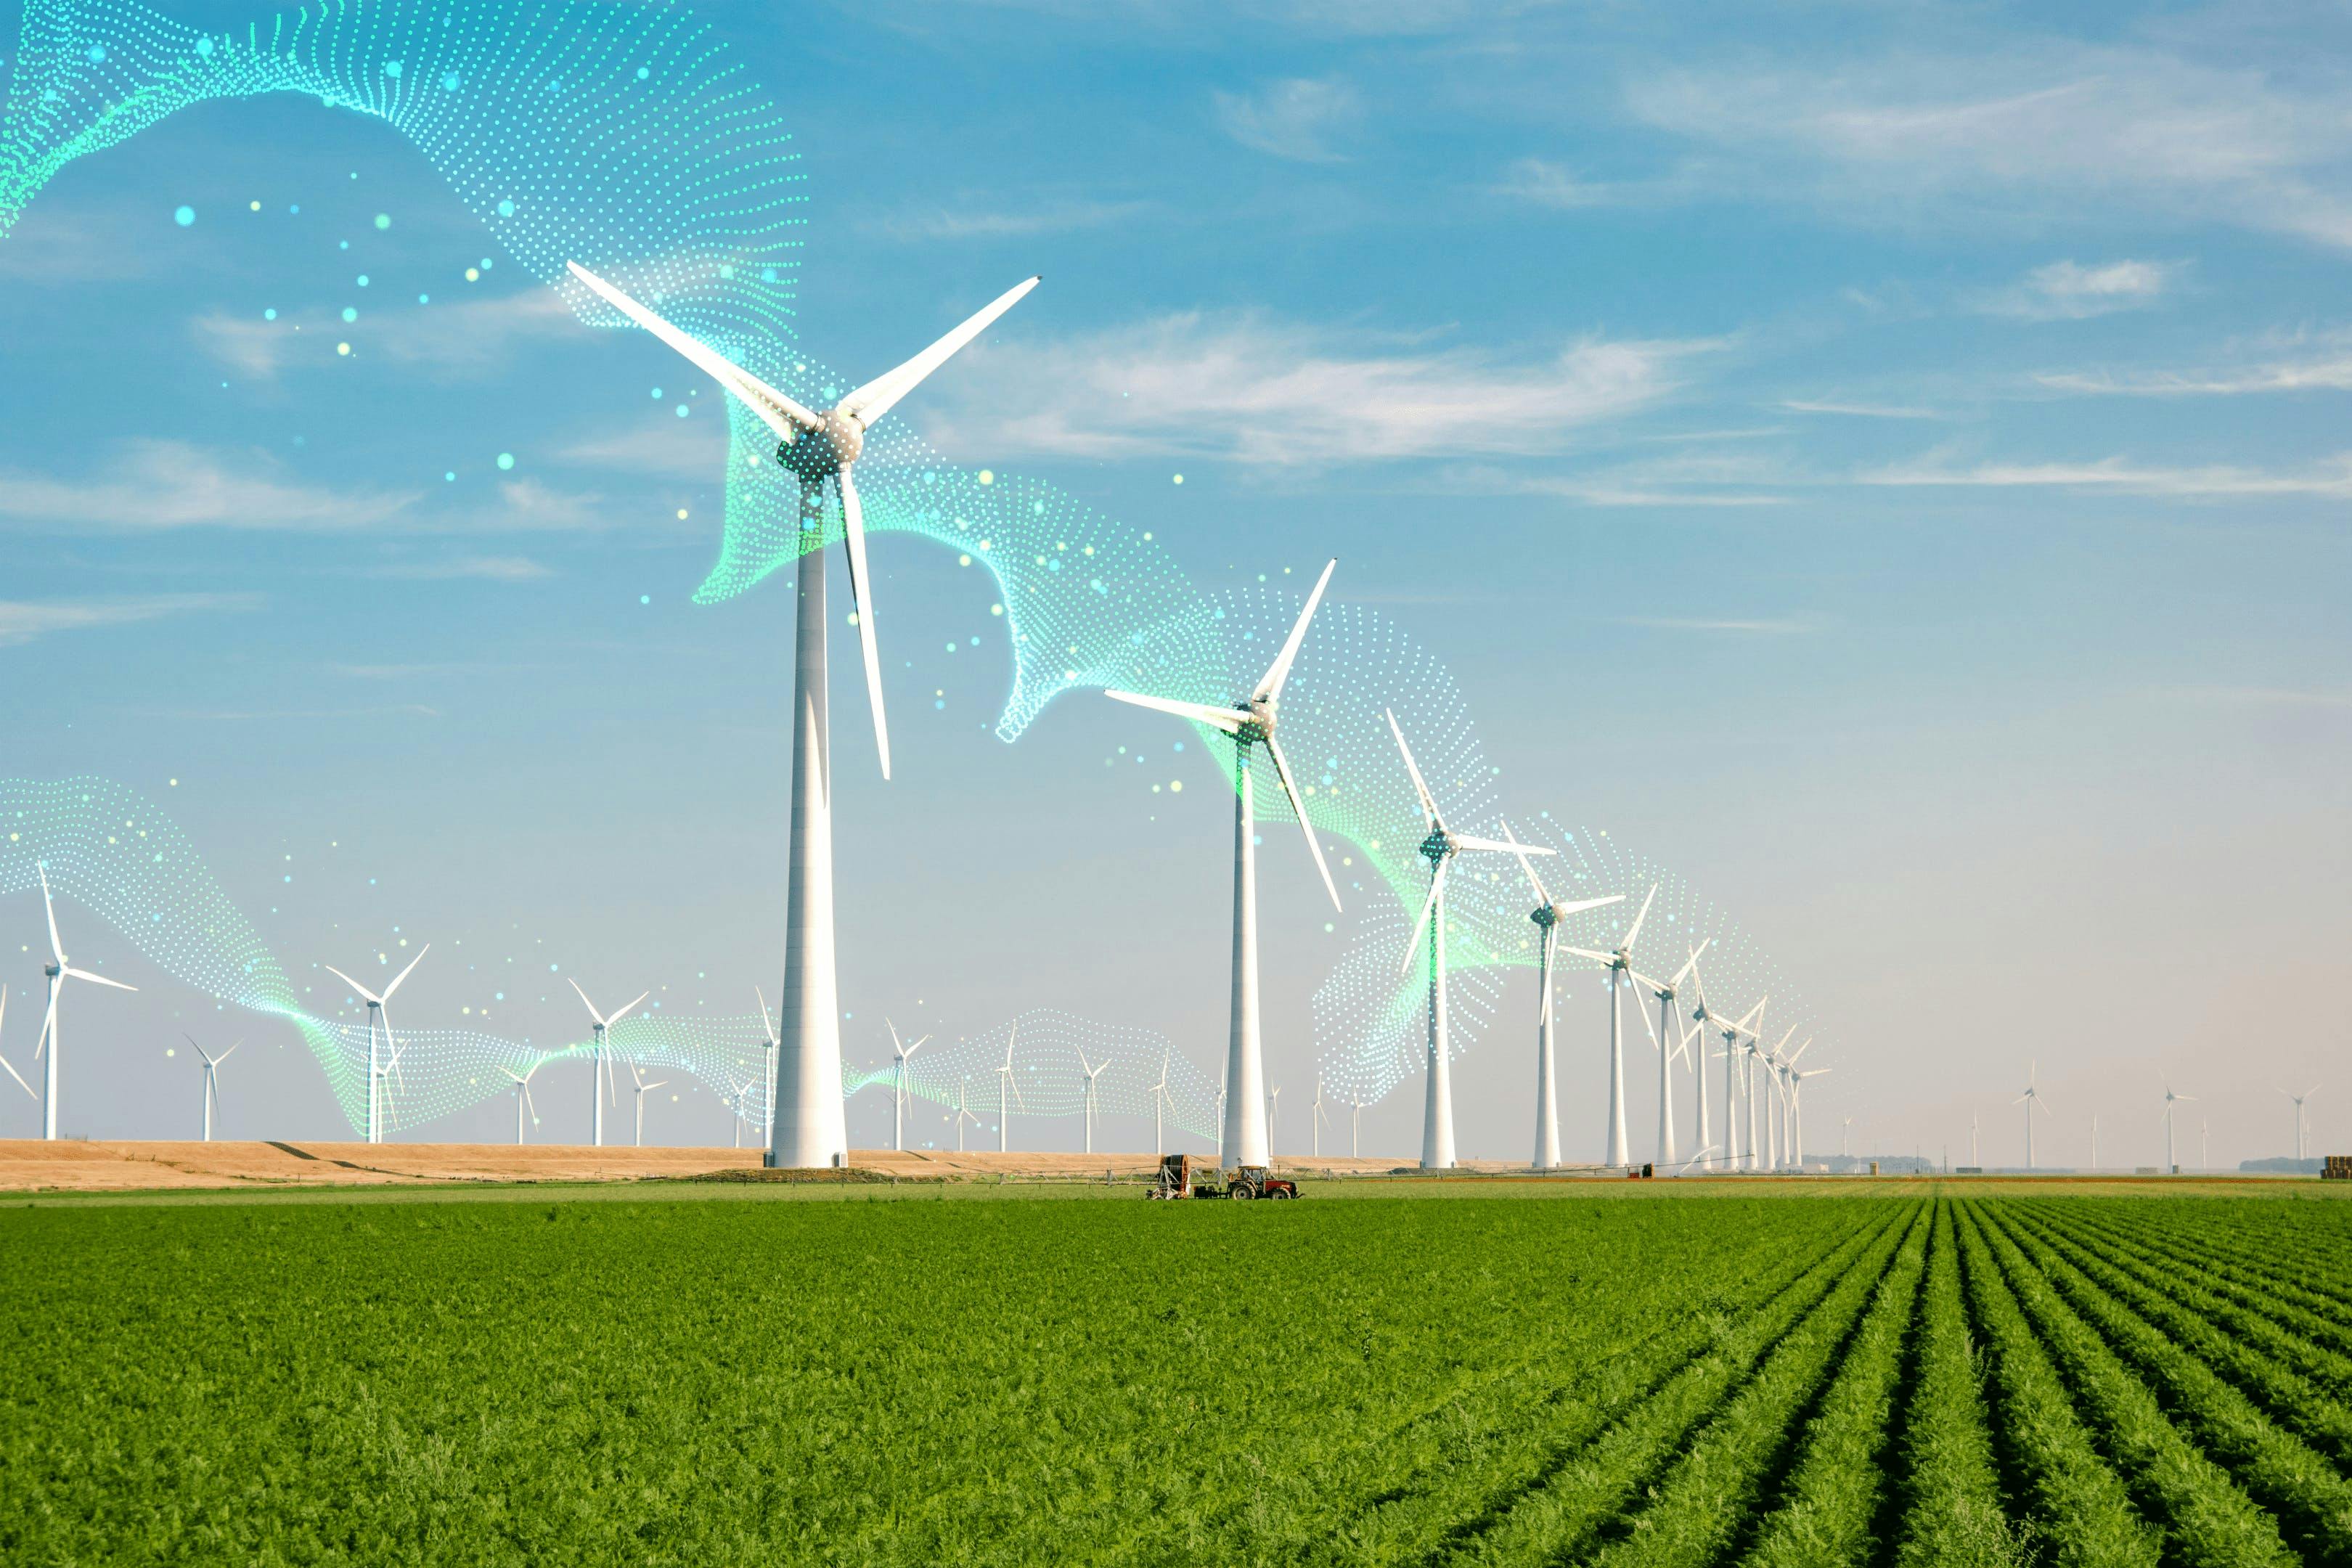 Windmills are lined up along a grassy field of crops. There are dots and lines in a neon blue connecting the windmills in the sky